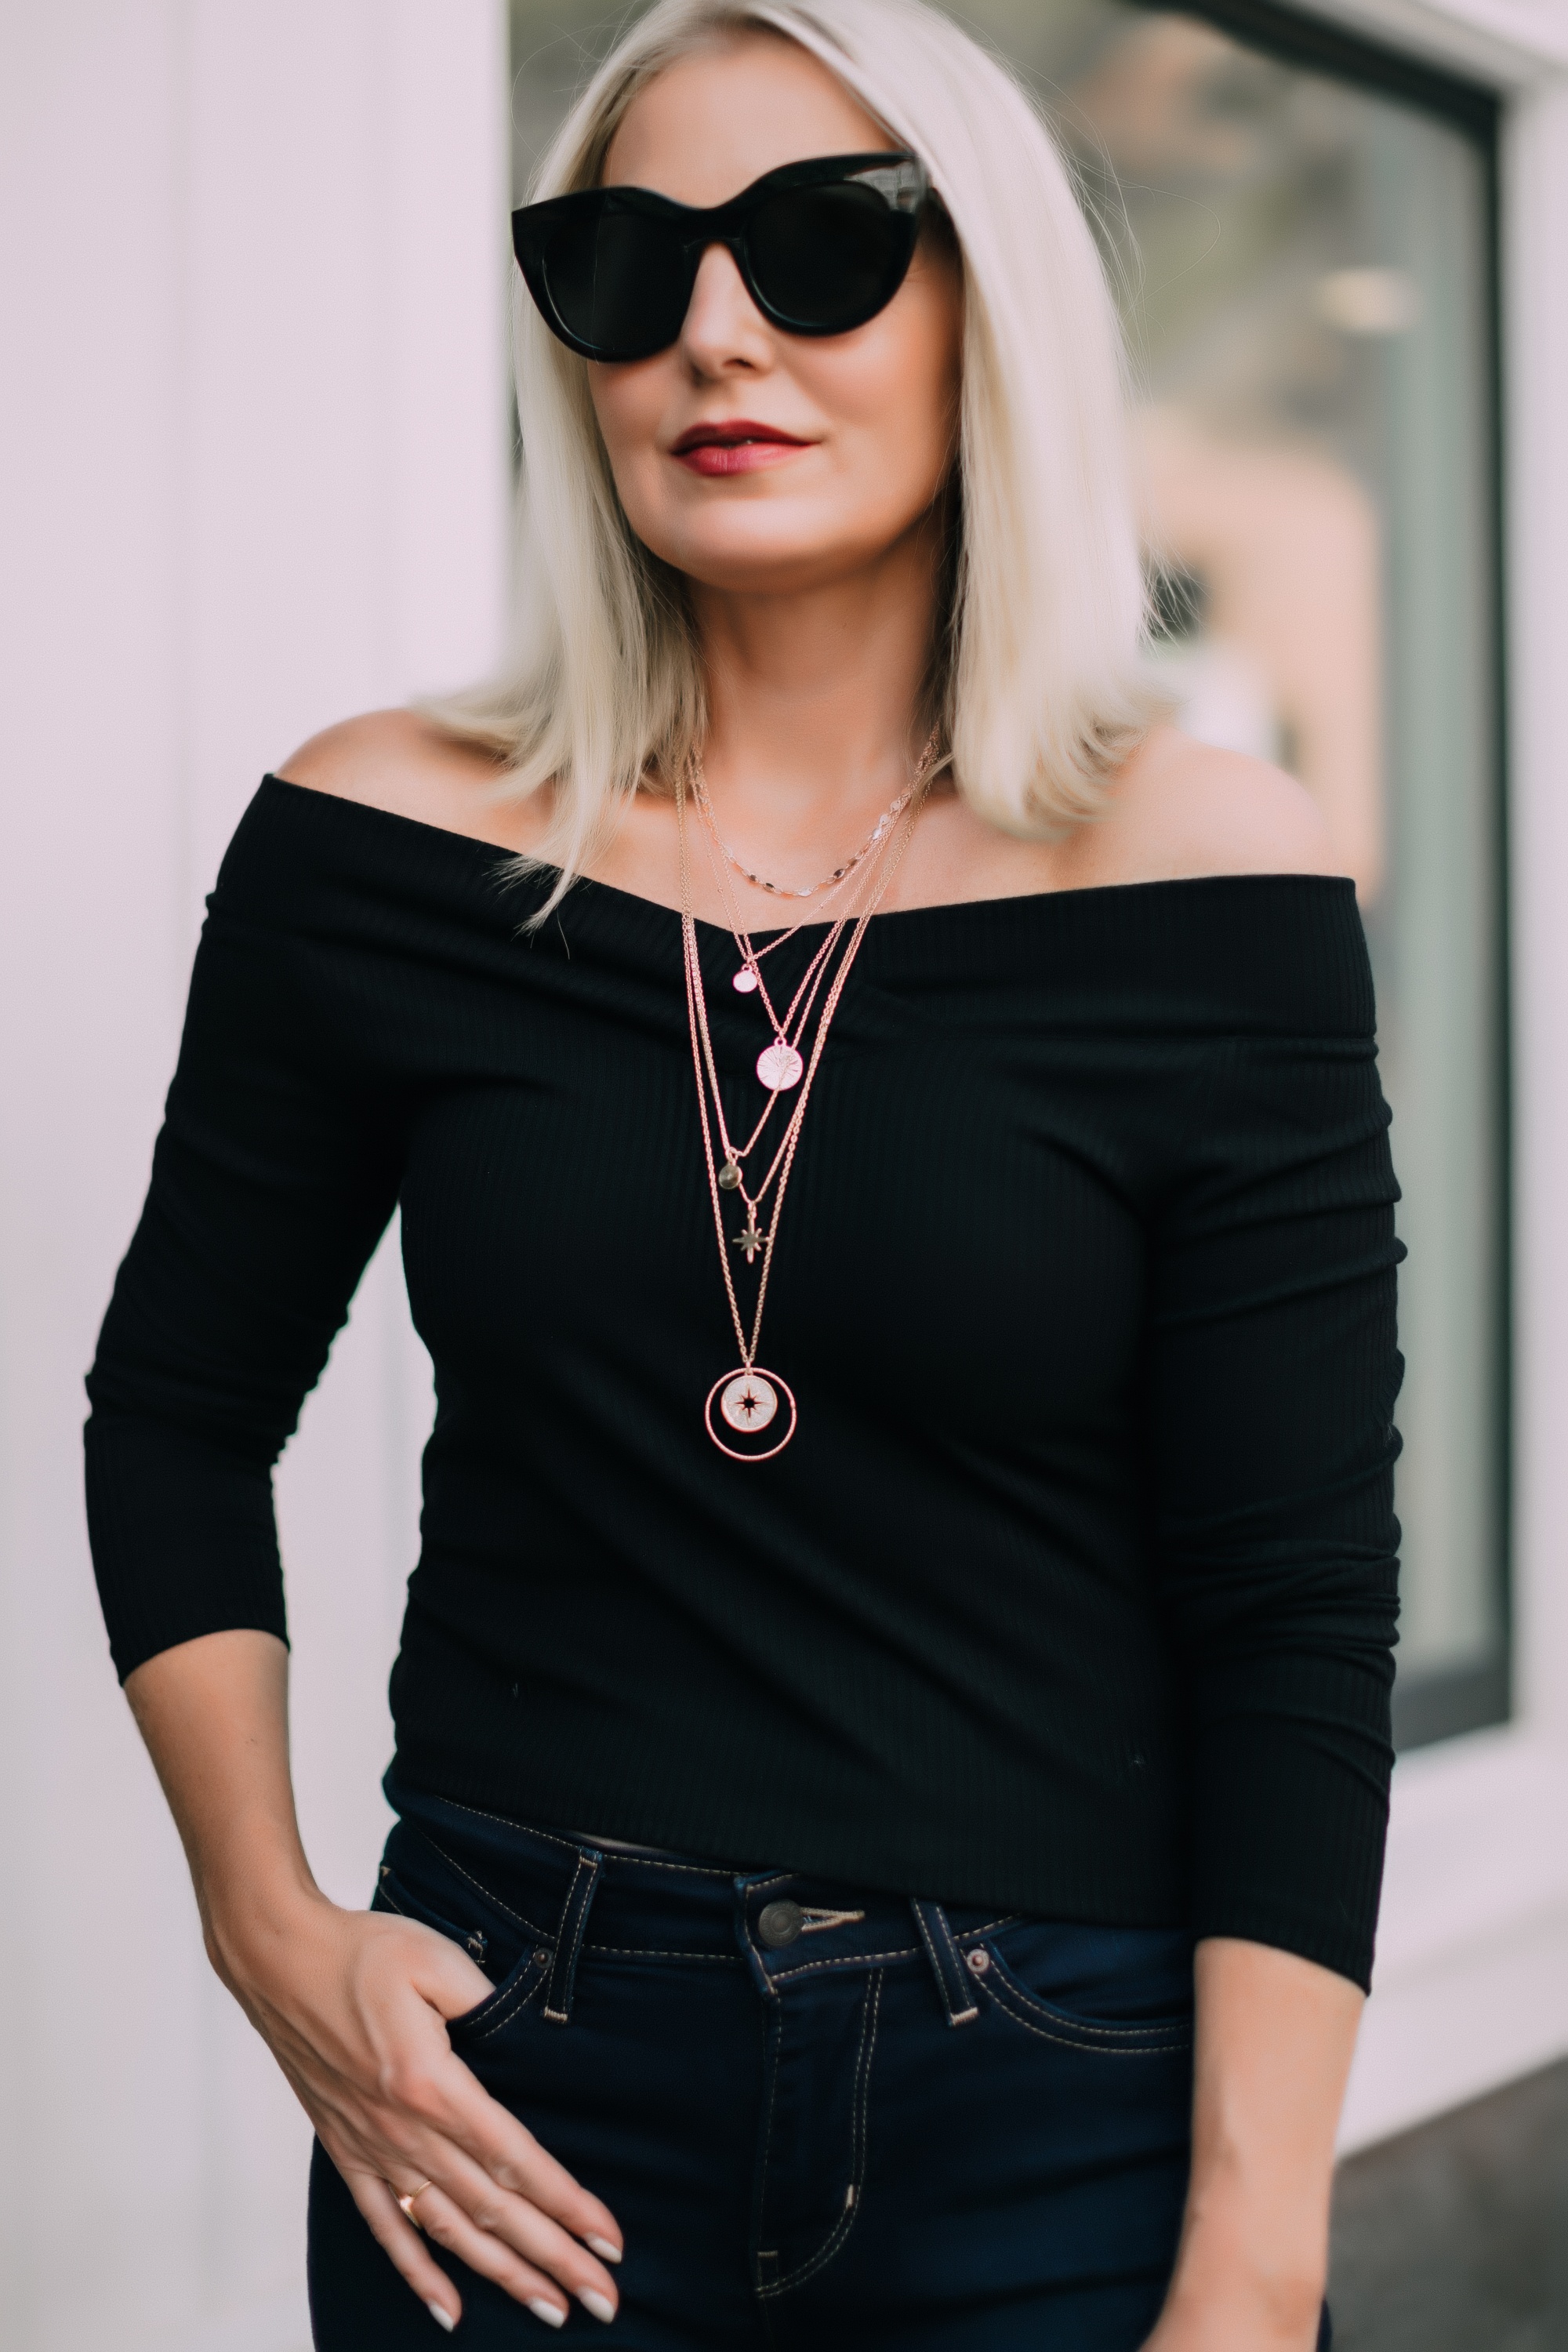 How to layer necklaces, Fashion blogger Erin Busbee of BusbeeStyle.com wearing Levi jeans, black studded sandals, black off the shoulder top, and a two pre-layered necklaces from JCPenney in Telluride, CO